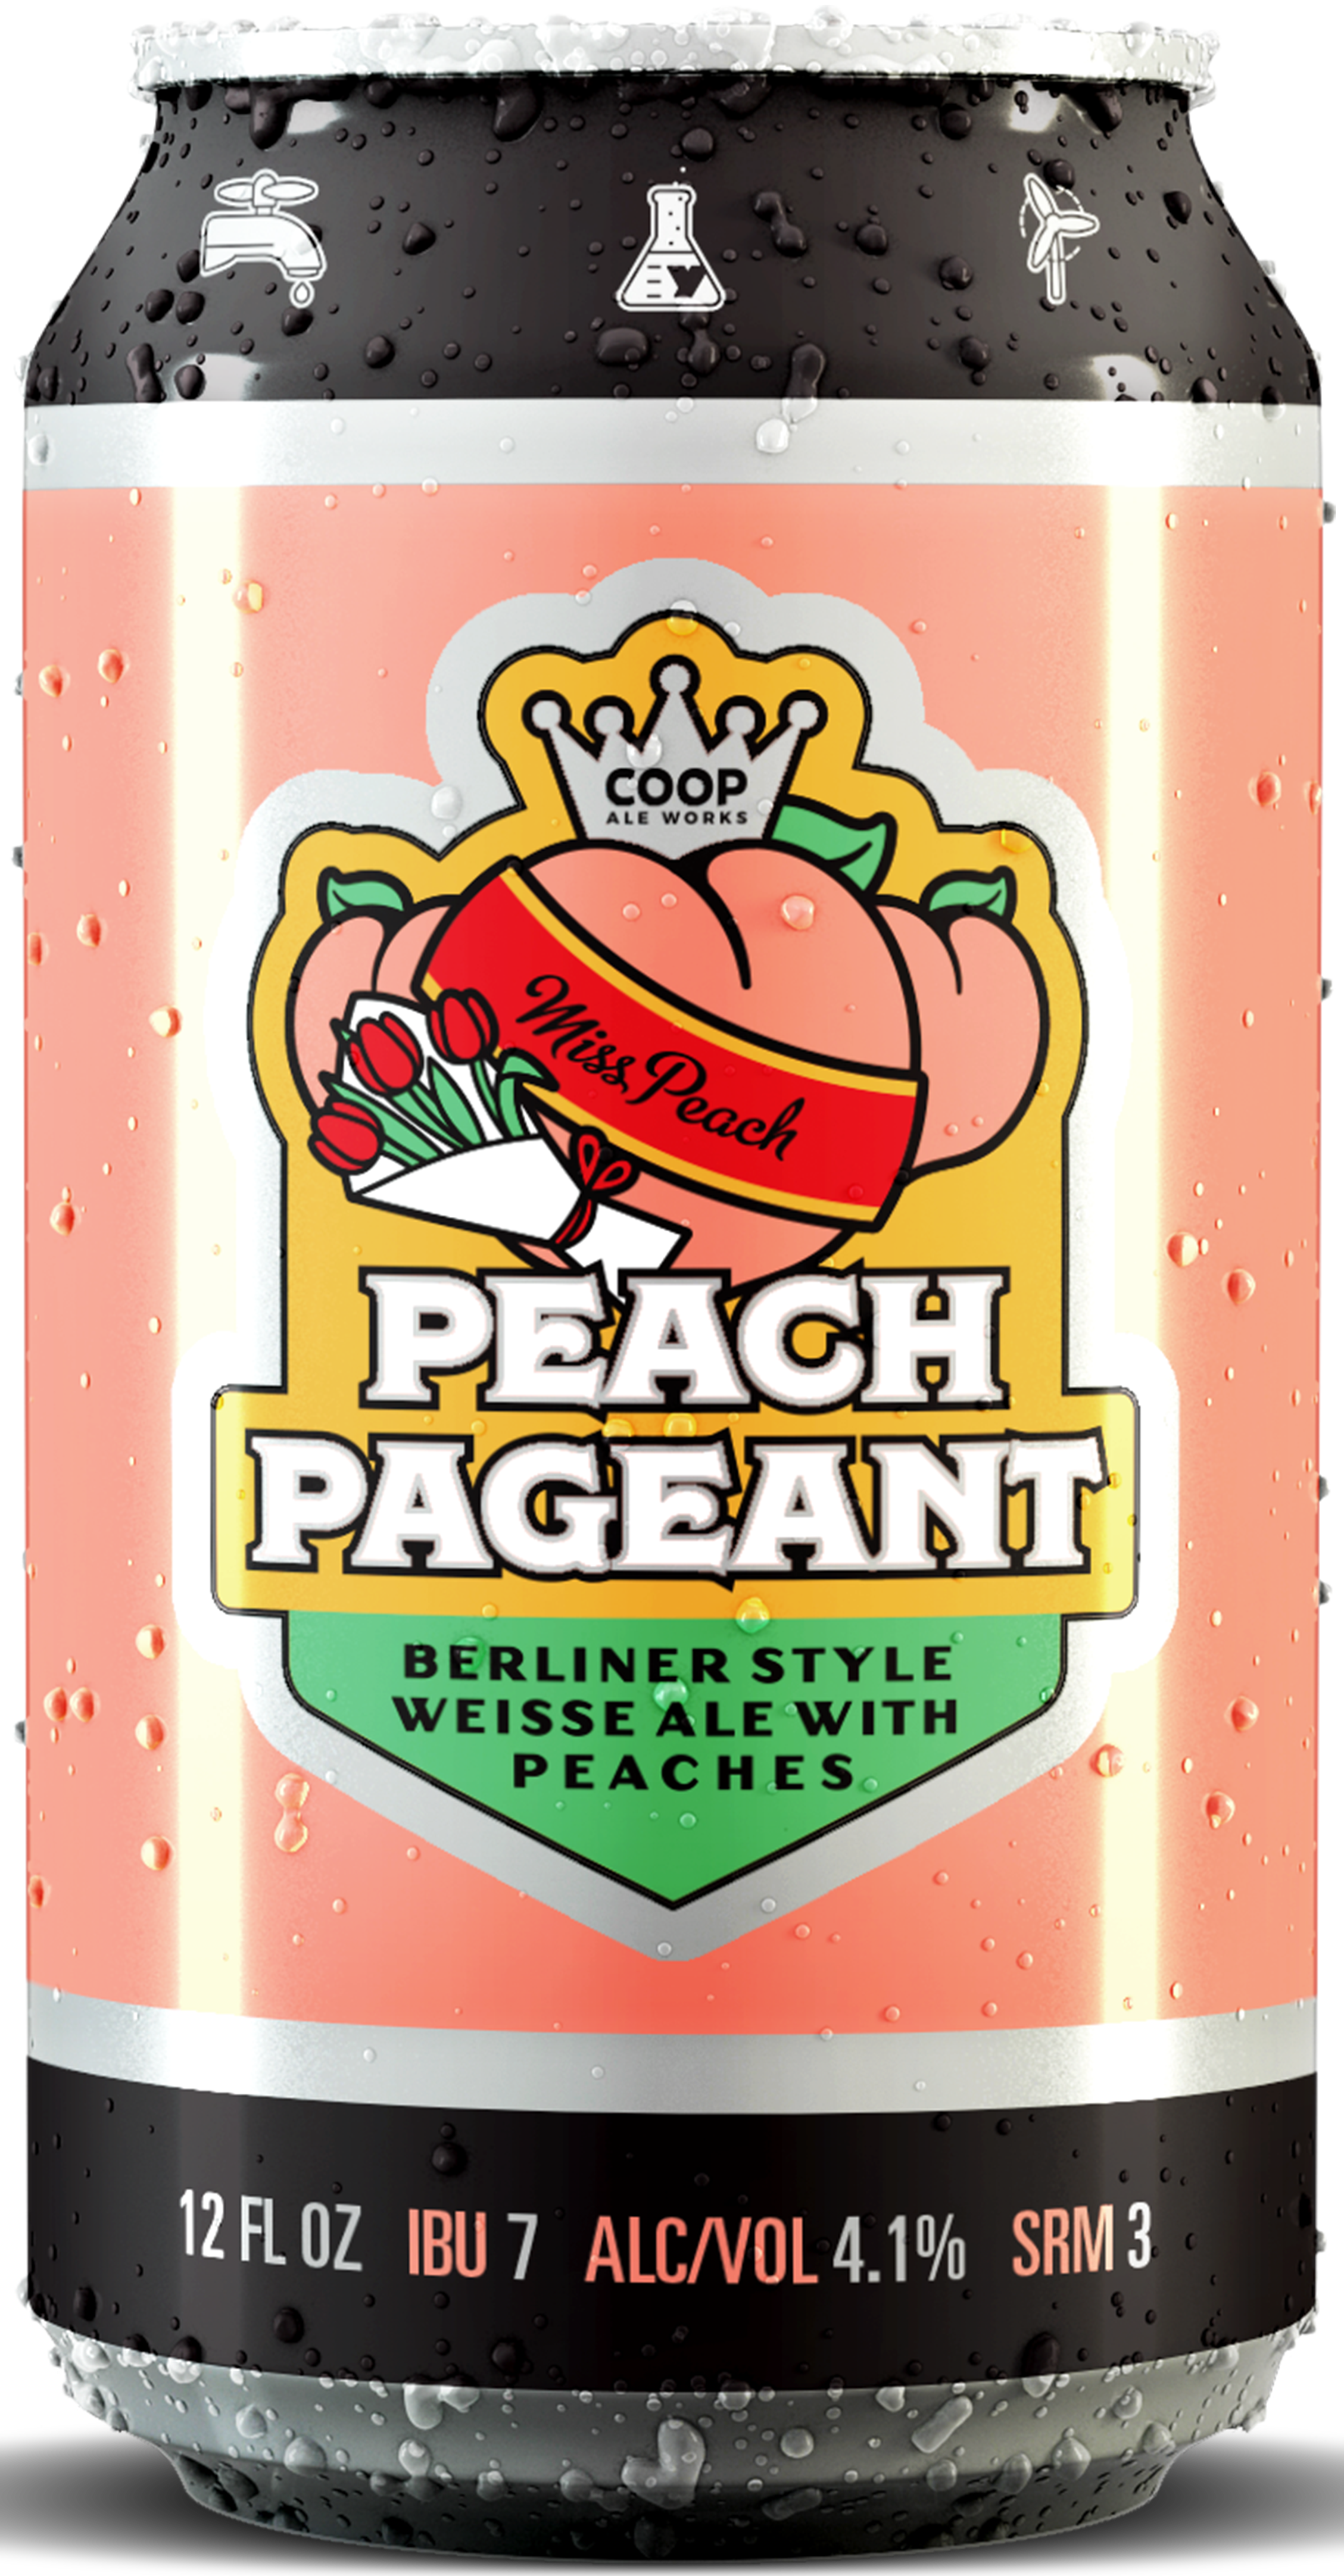 Peach Pageant Berliner Style Weisse Ale